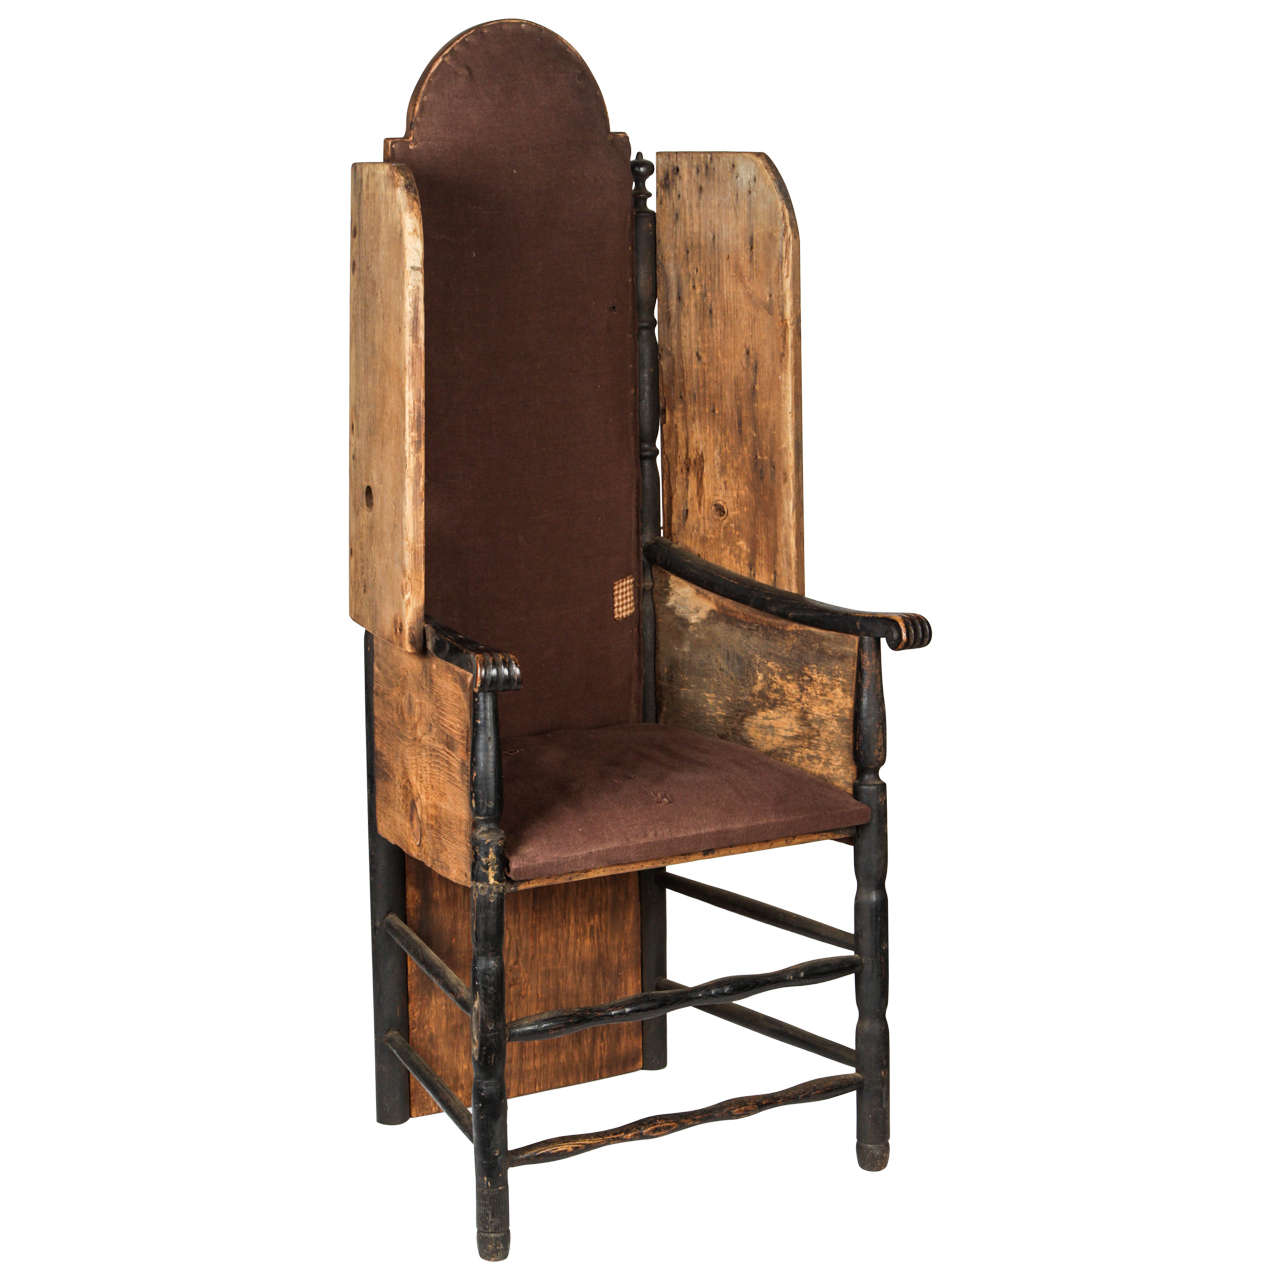 Early American Primitive Chair